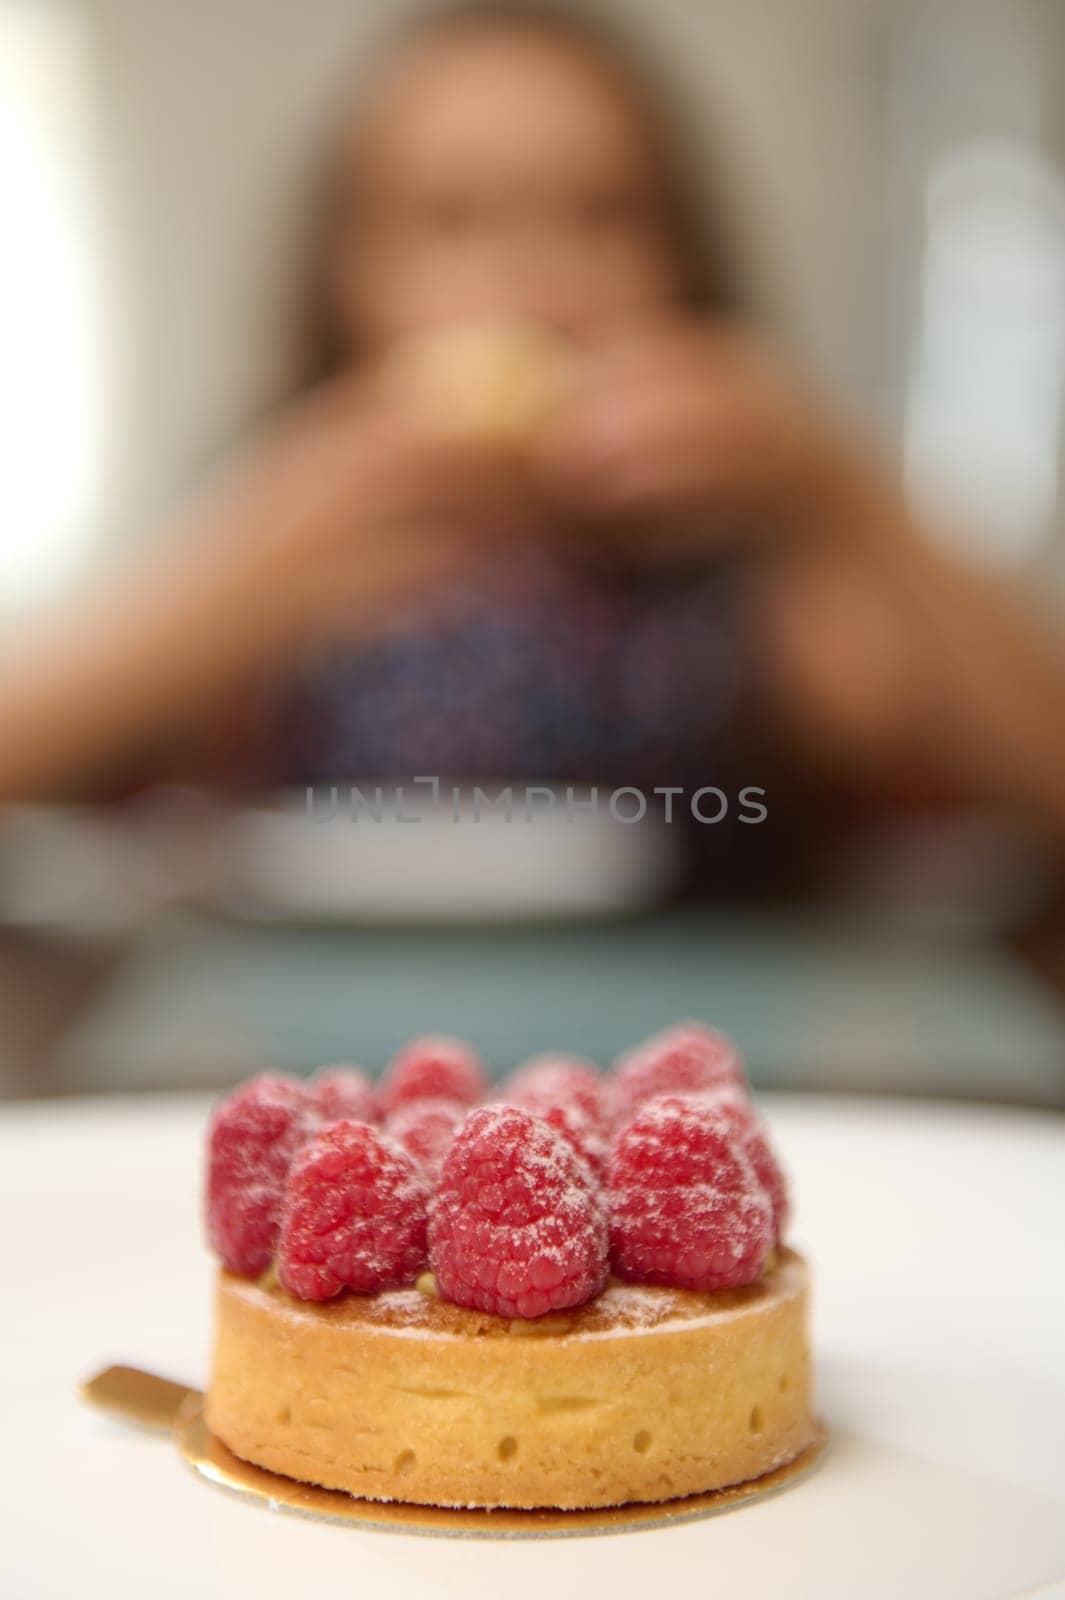 Details on a tasty sweet French dessert - a tartlet with raspberries on white plate, over blurred background of a little child taking her breakfast or snacking. Food still life. Culinary. Patisserie